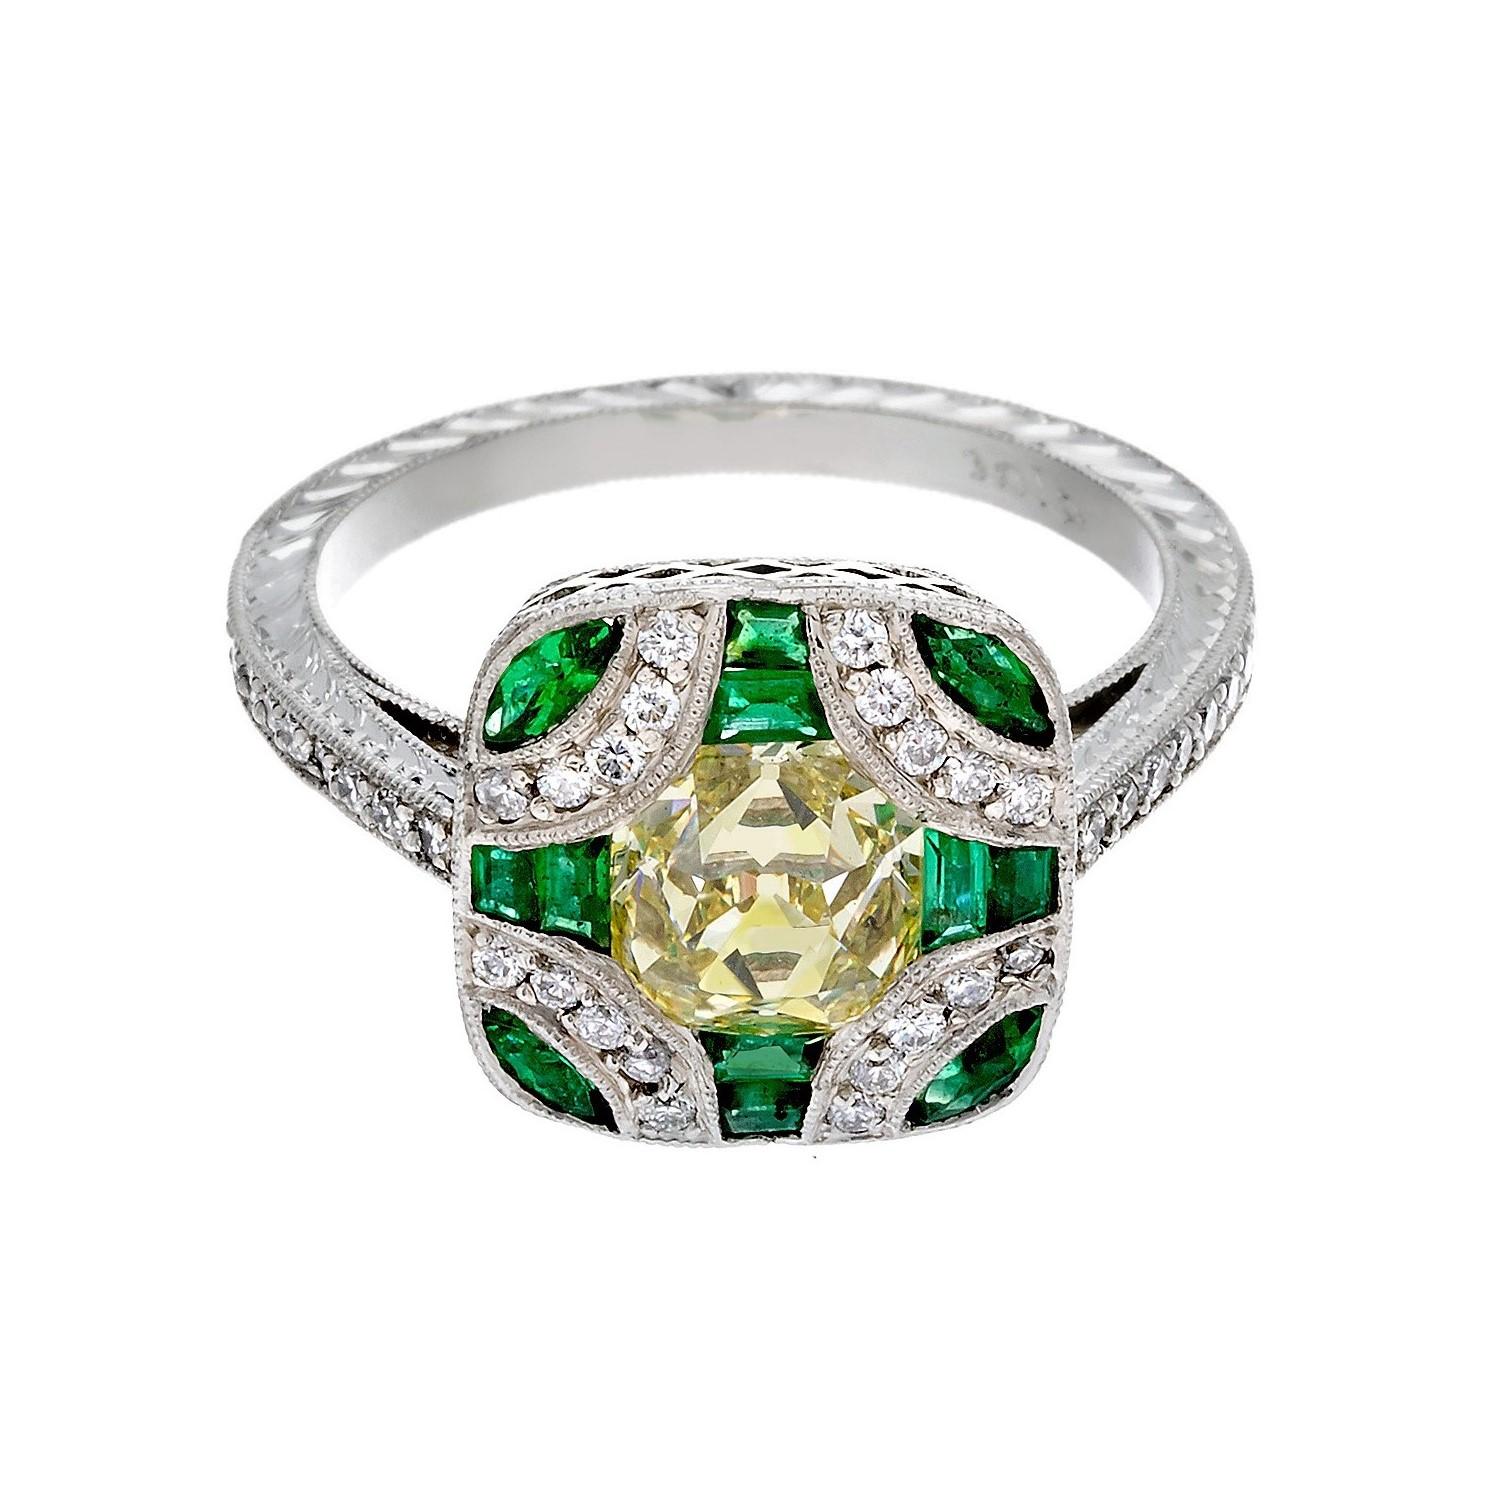 Antique Edwardian Style Fancy Yellow Old Mine Cut Diamond and Emerald Ring im Angebot 6